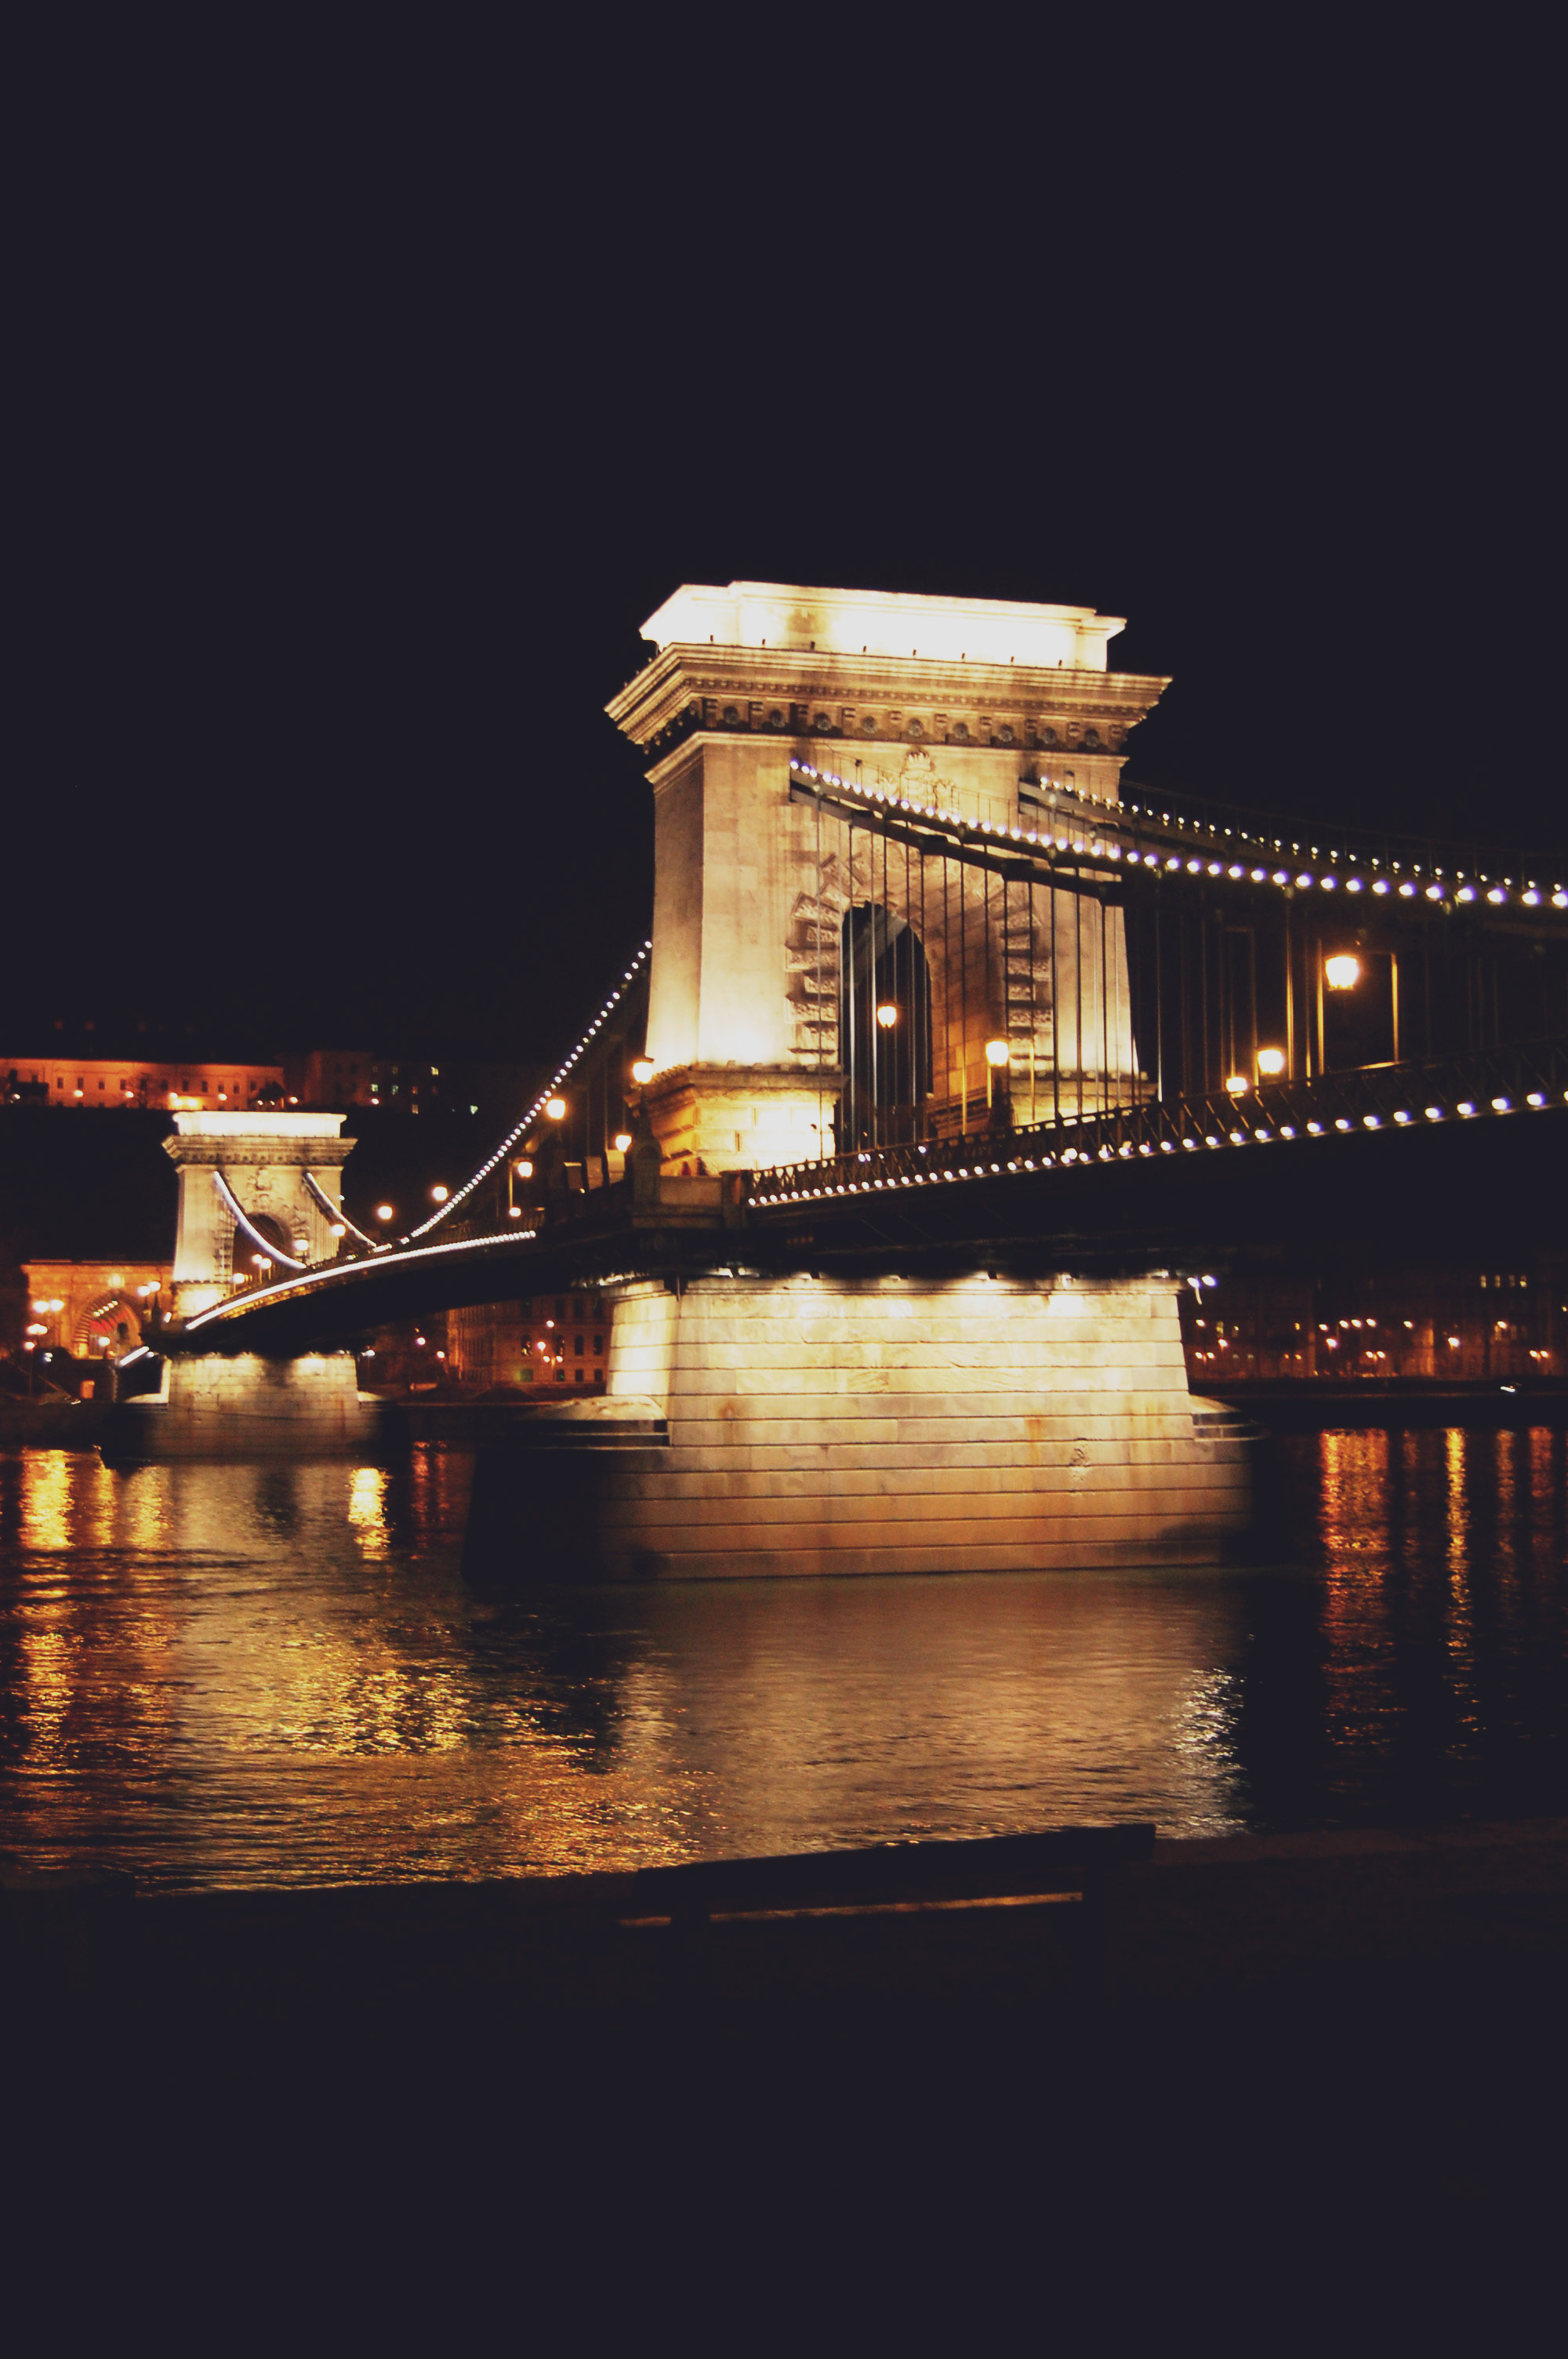 Budapest and its people